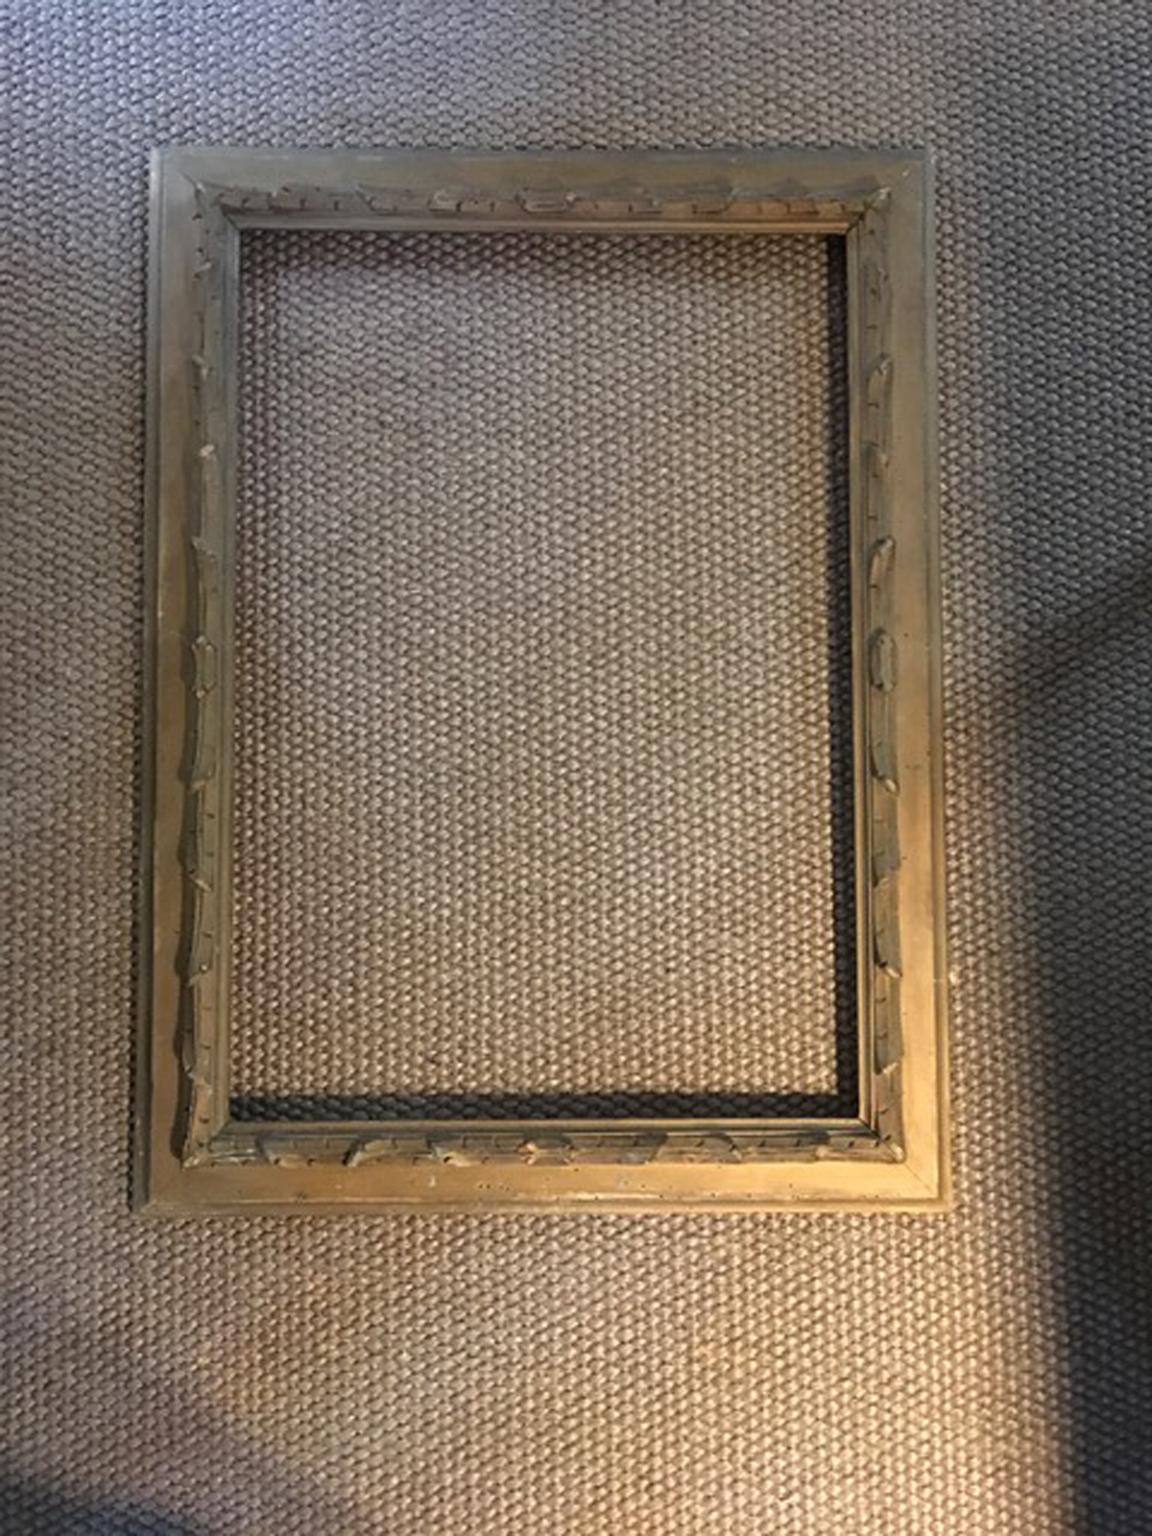 This is an elegant wood frame, lacquered in mat gold. The thick hand carved border also is lacquered in gold.
The frame has the look of the past and shows all the signs of the age, but remains a piece of great charm.

Never restored.
With